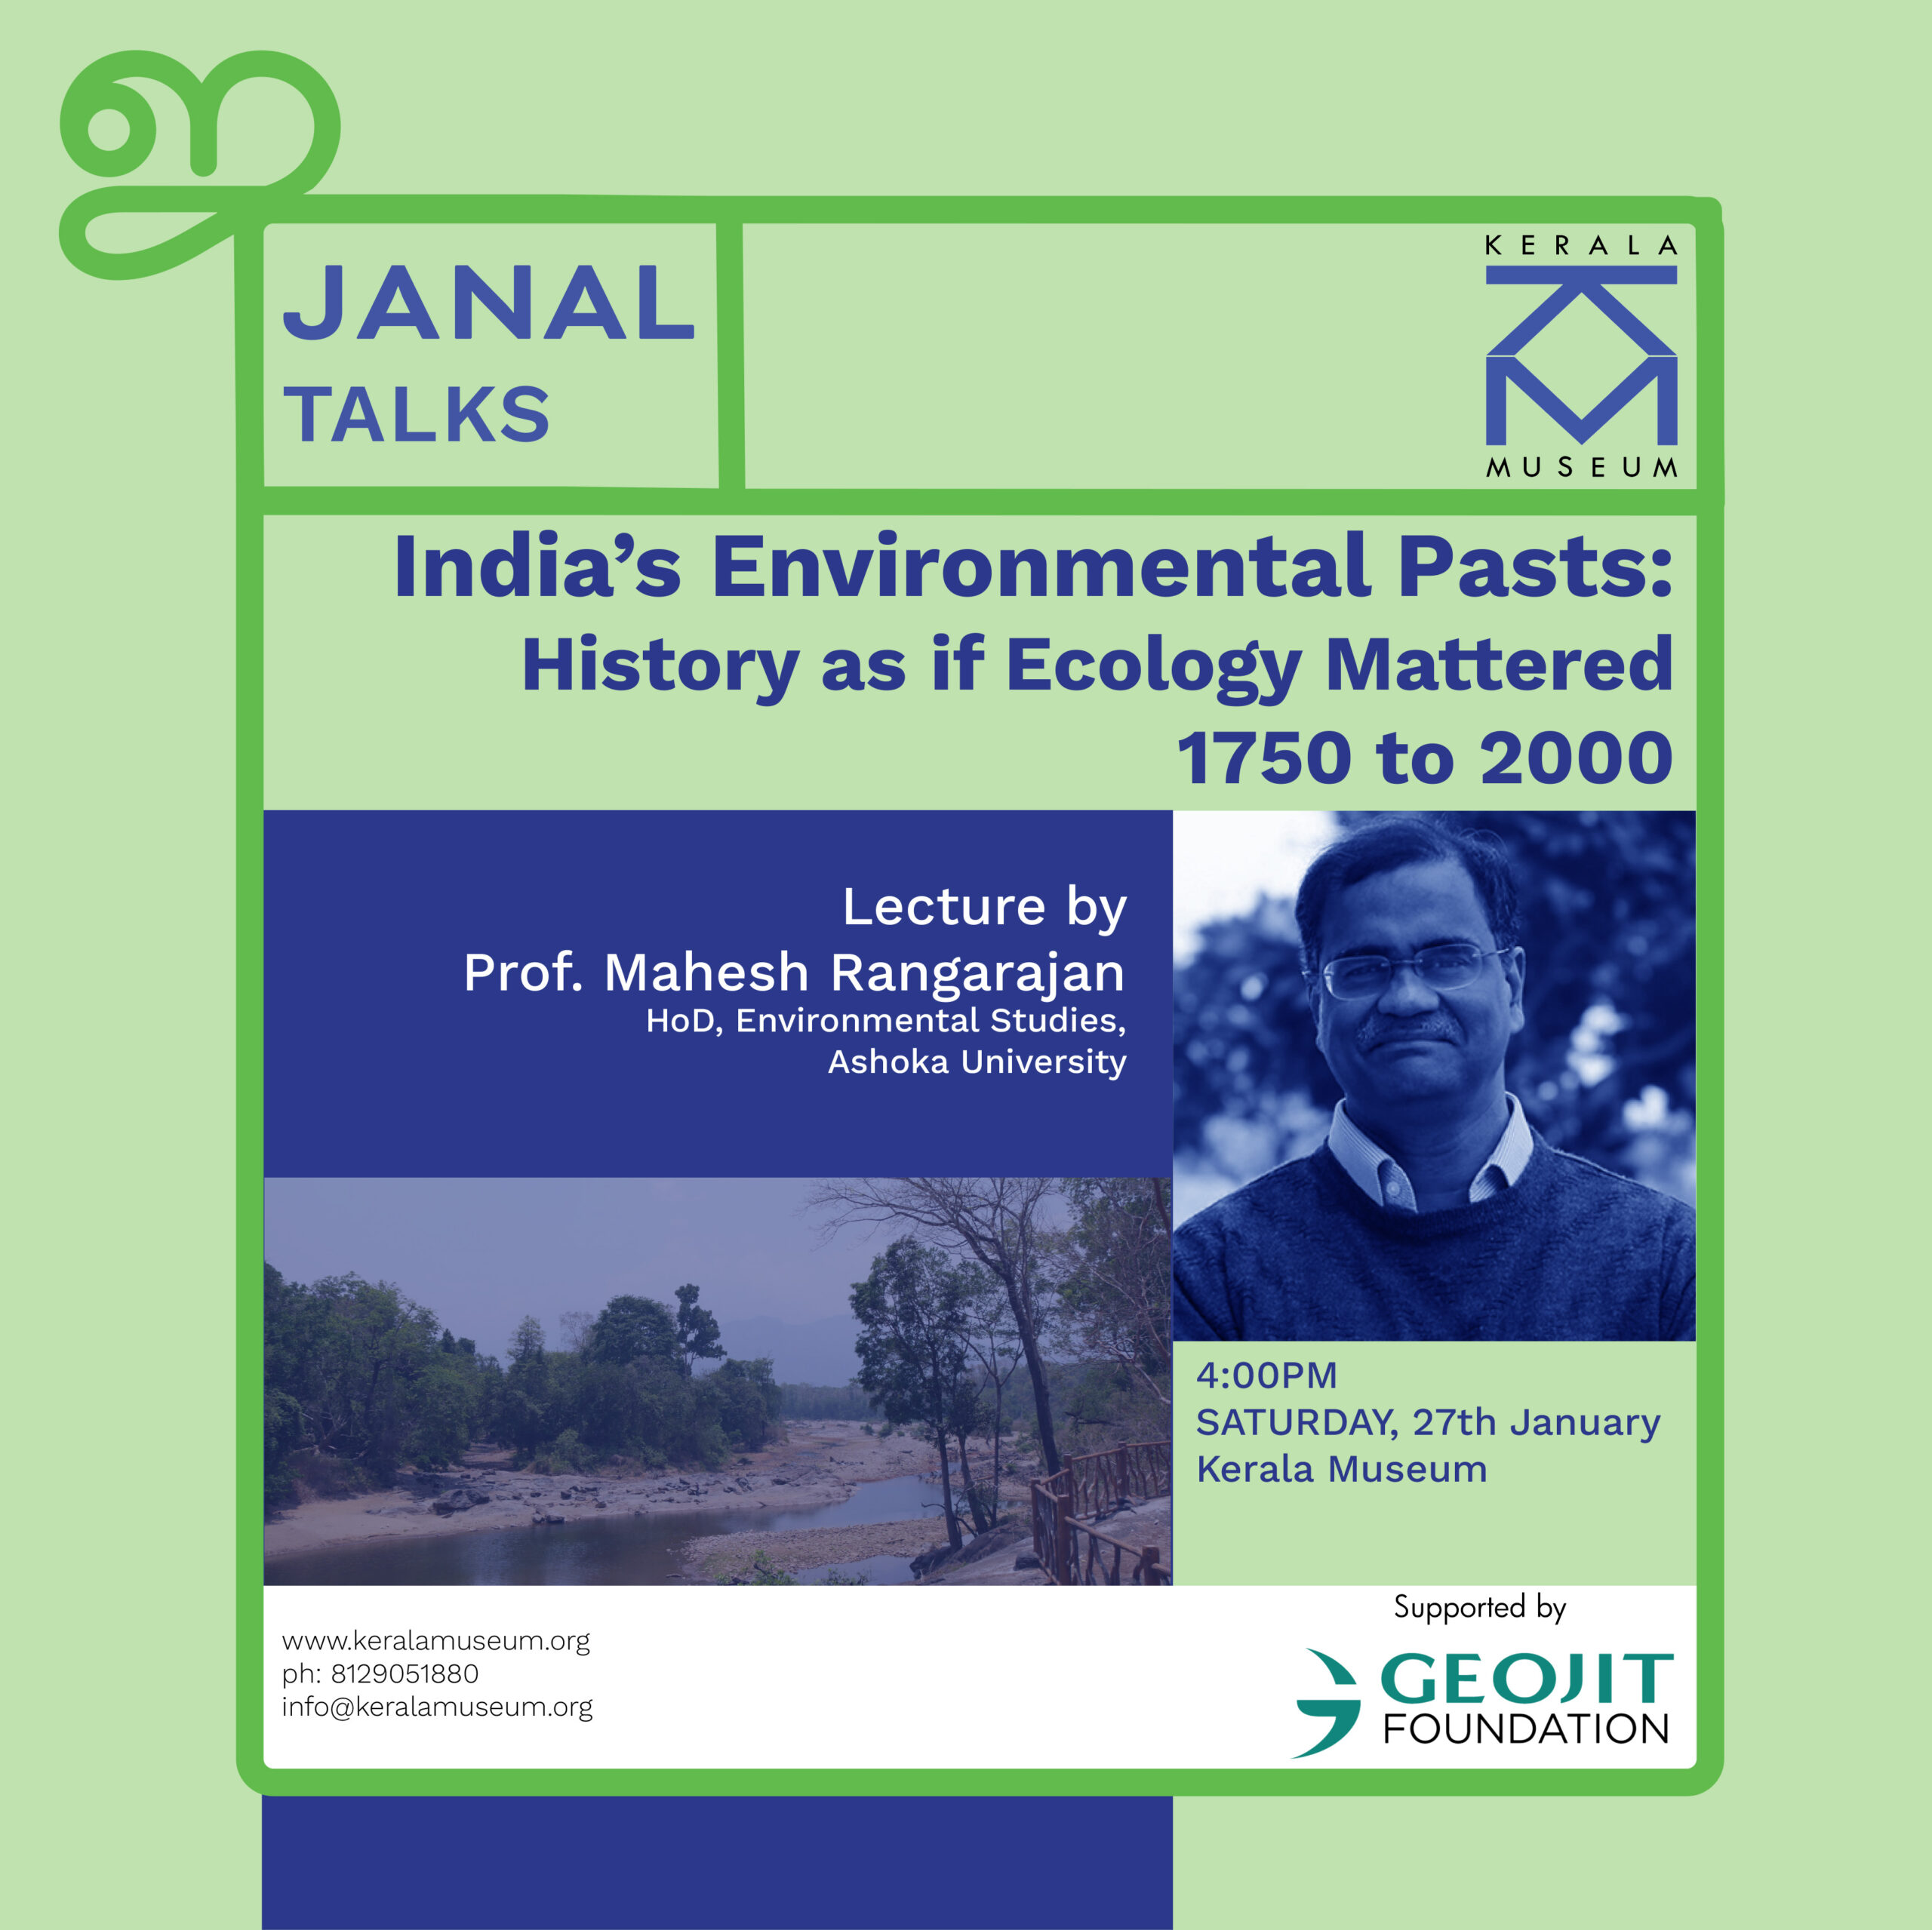 Janal Talks: India’s Environmental Pasts: History as if Ecology Mattered 1750 to 2000